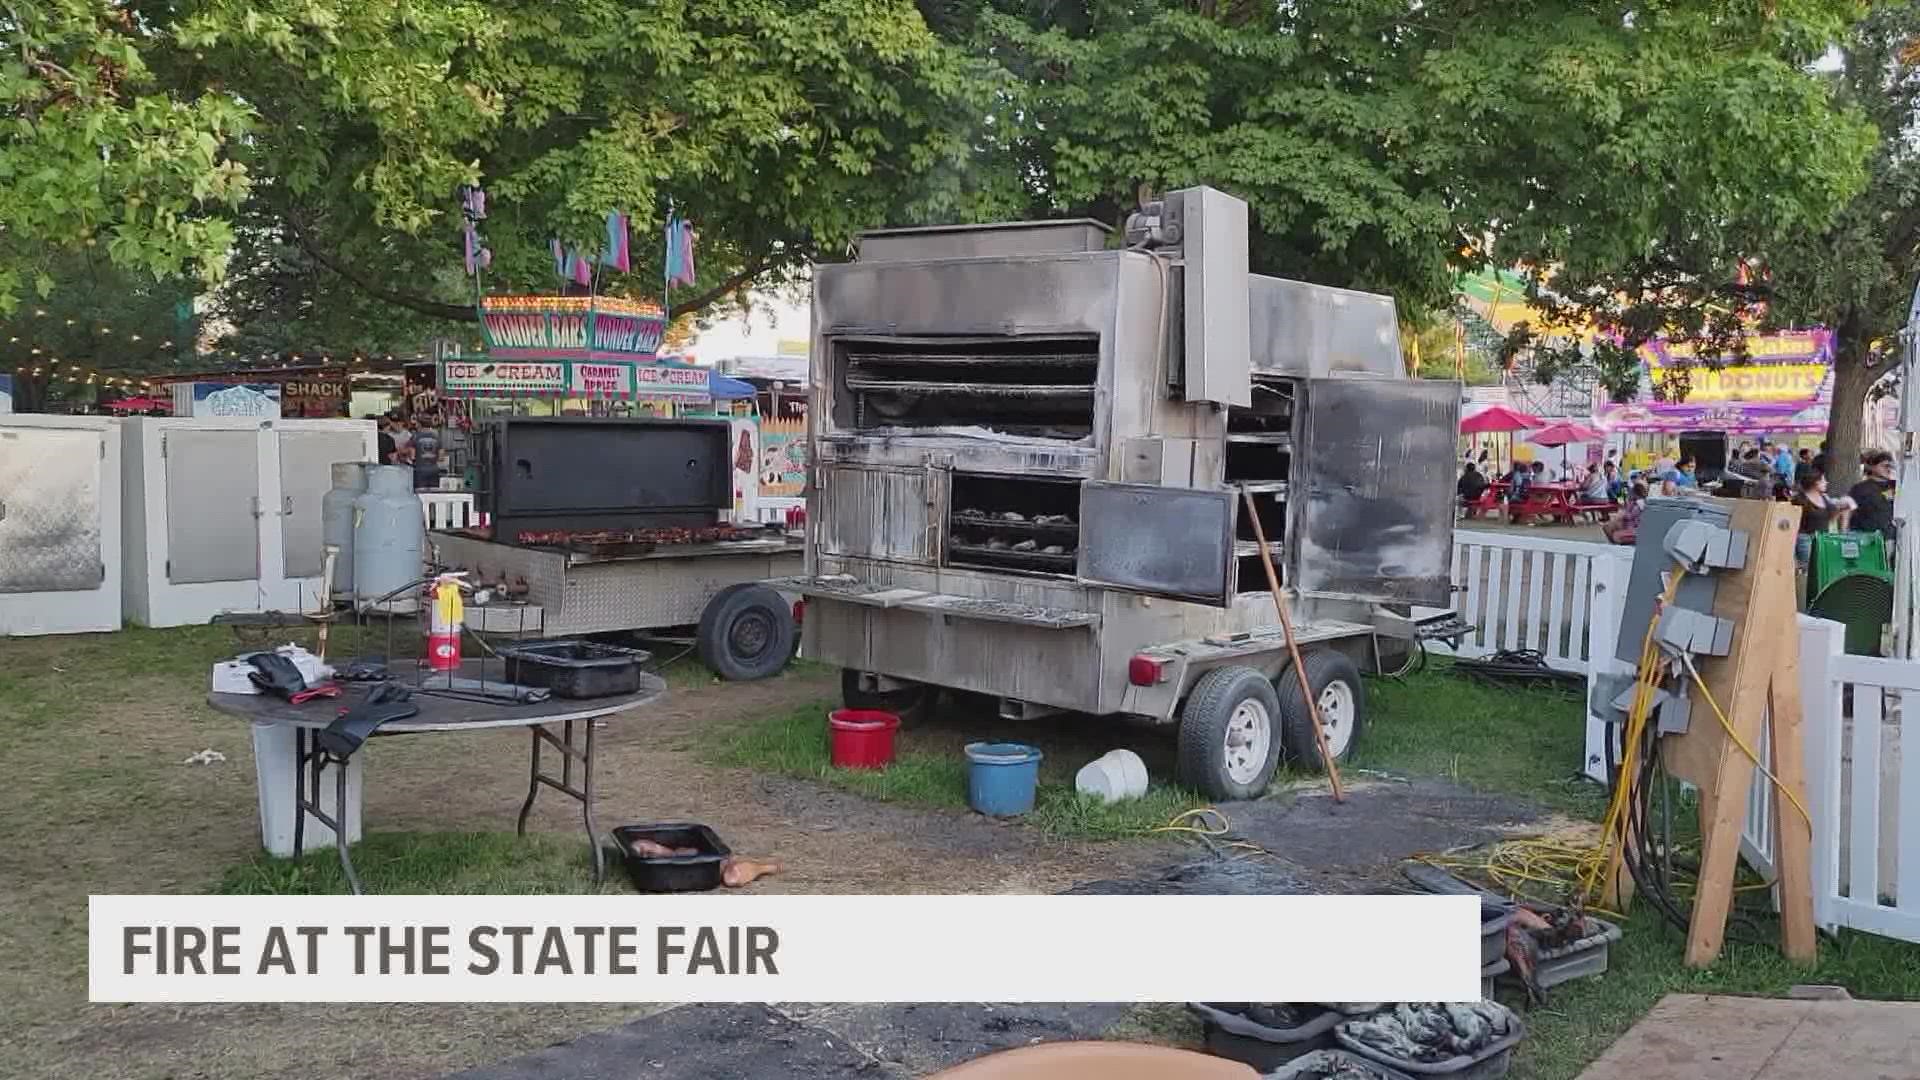 The cooker caught fire and was out of control. Fairgoers and troopers scrambled to put out the fire as quickly as possible before firefighters came to finish it off.